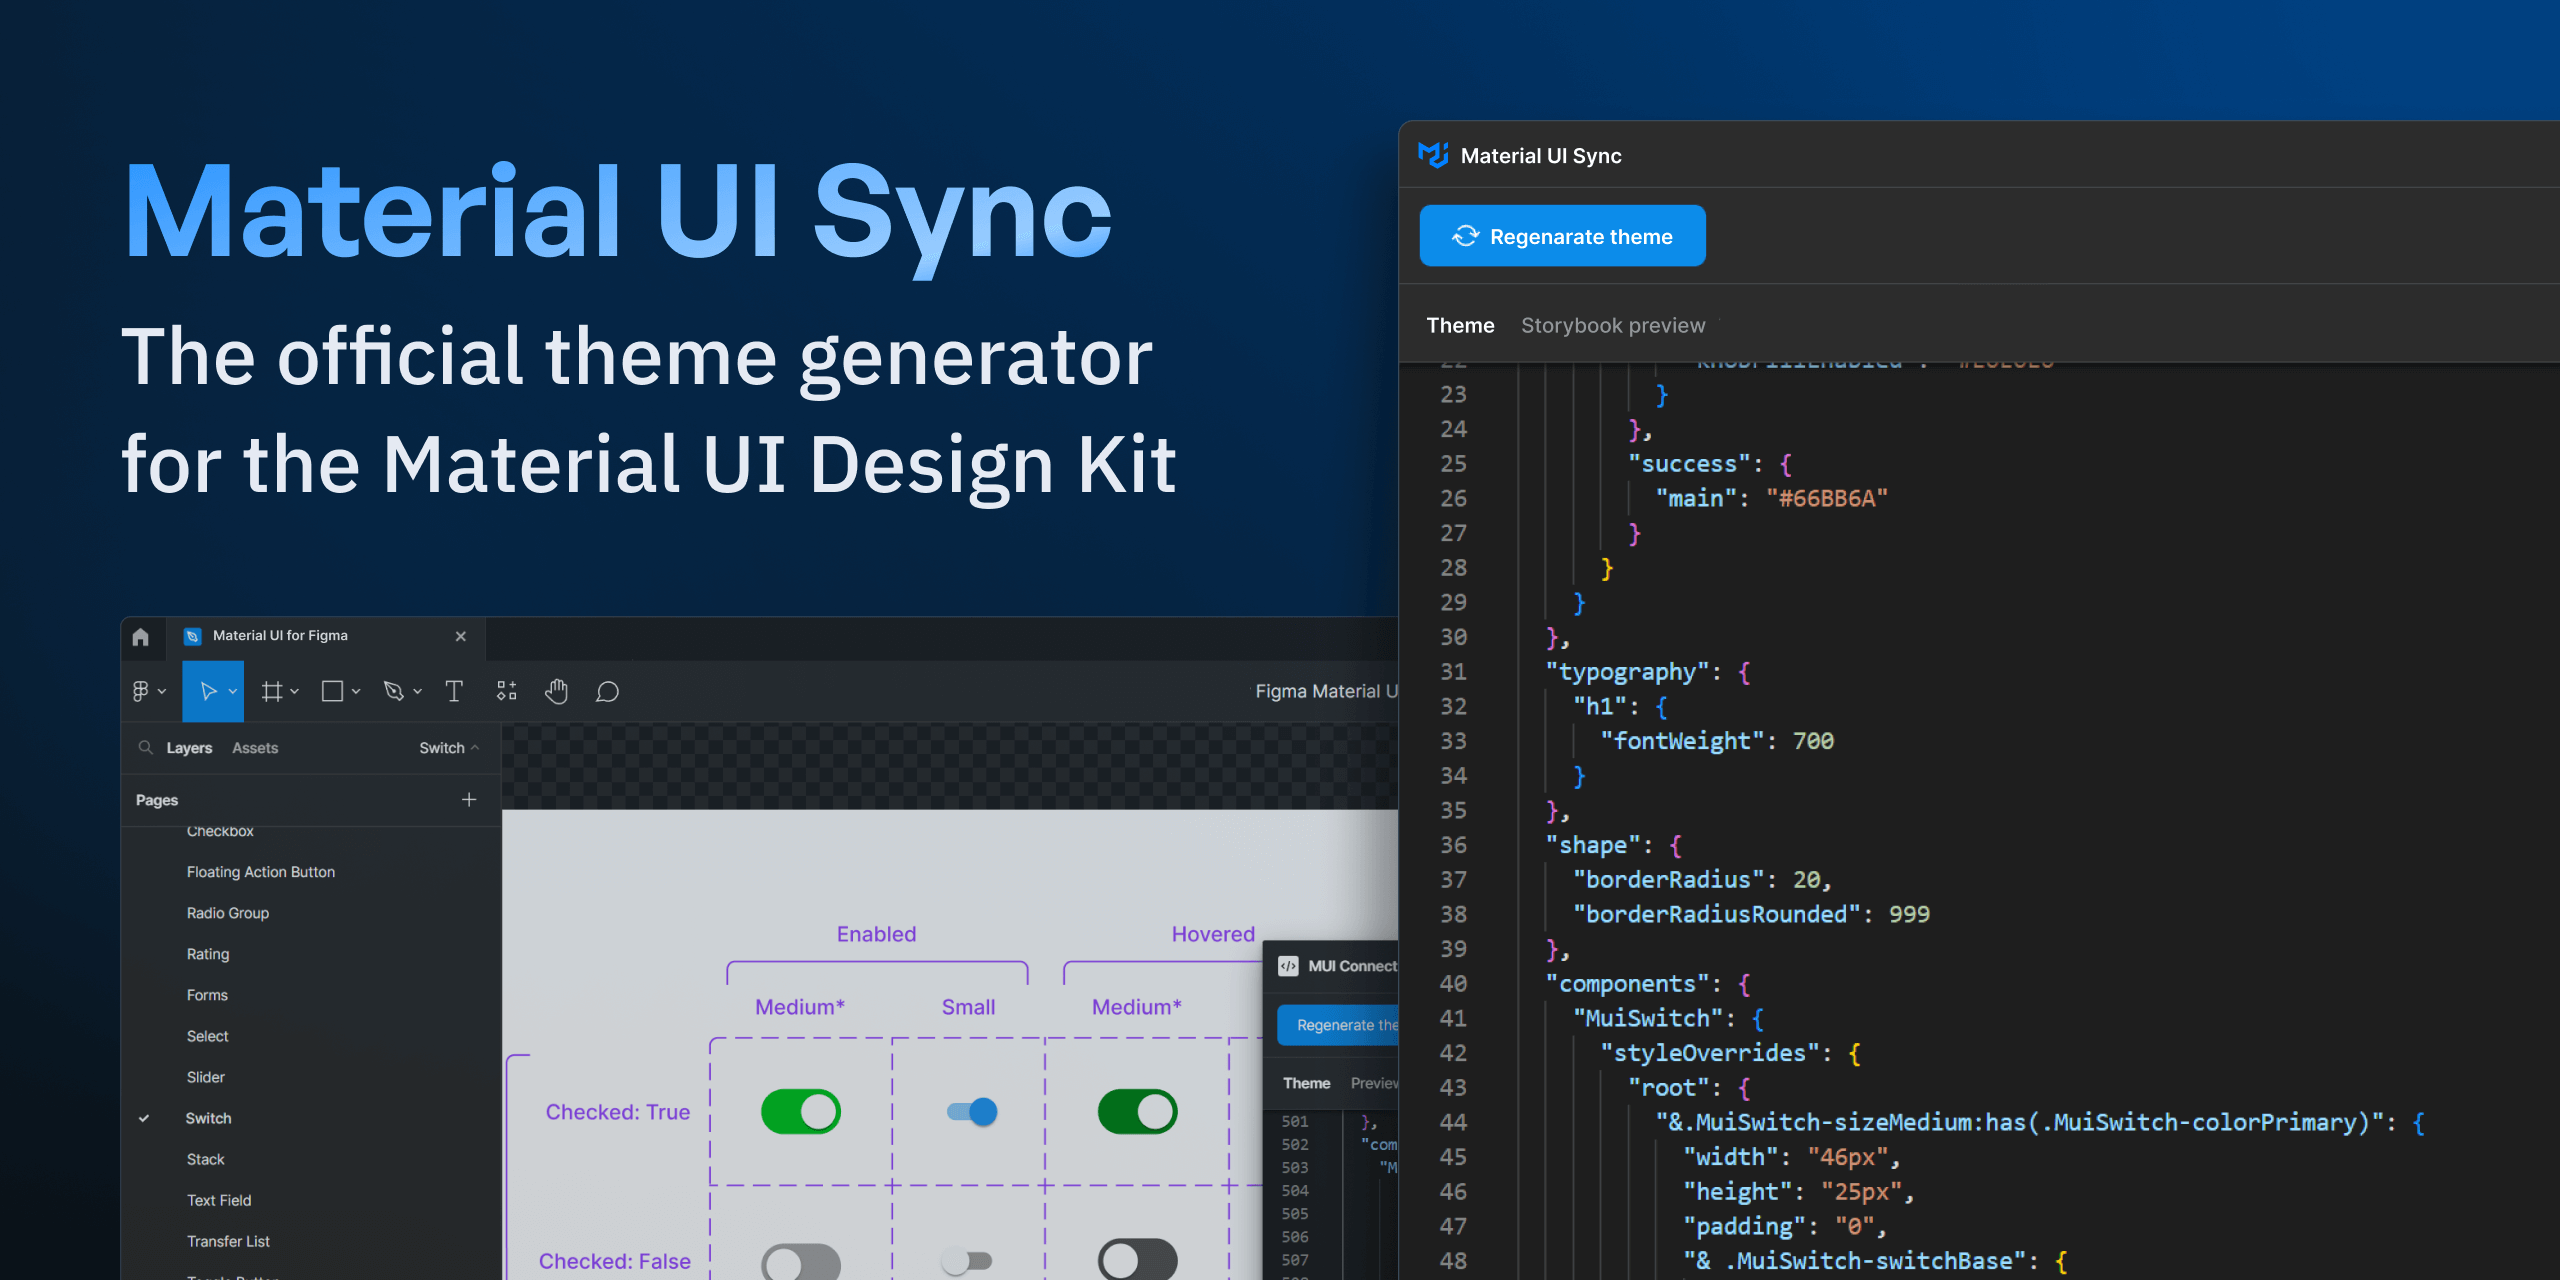 Material UI Sync is a Figma plugin that lets you generate a theme from the Material UI for Figma Design Kit.